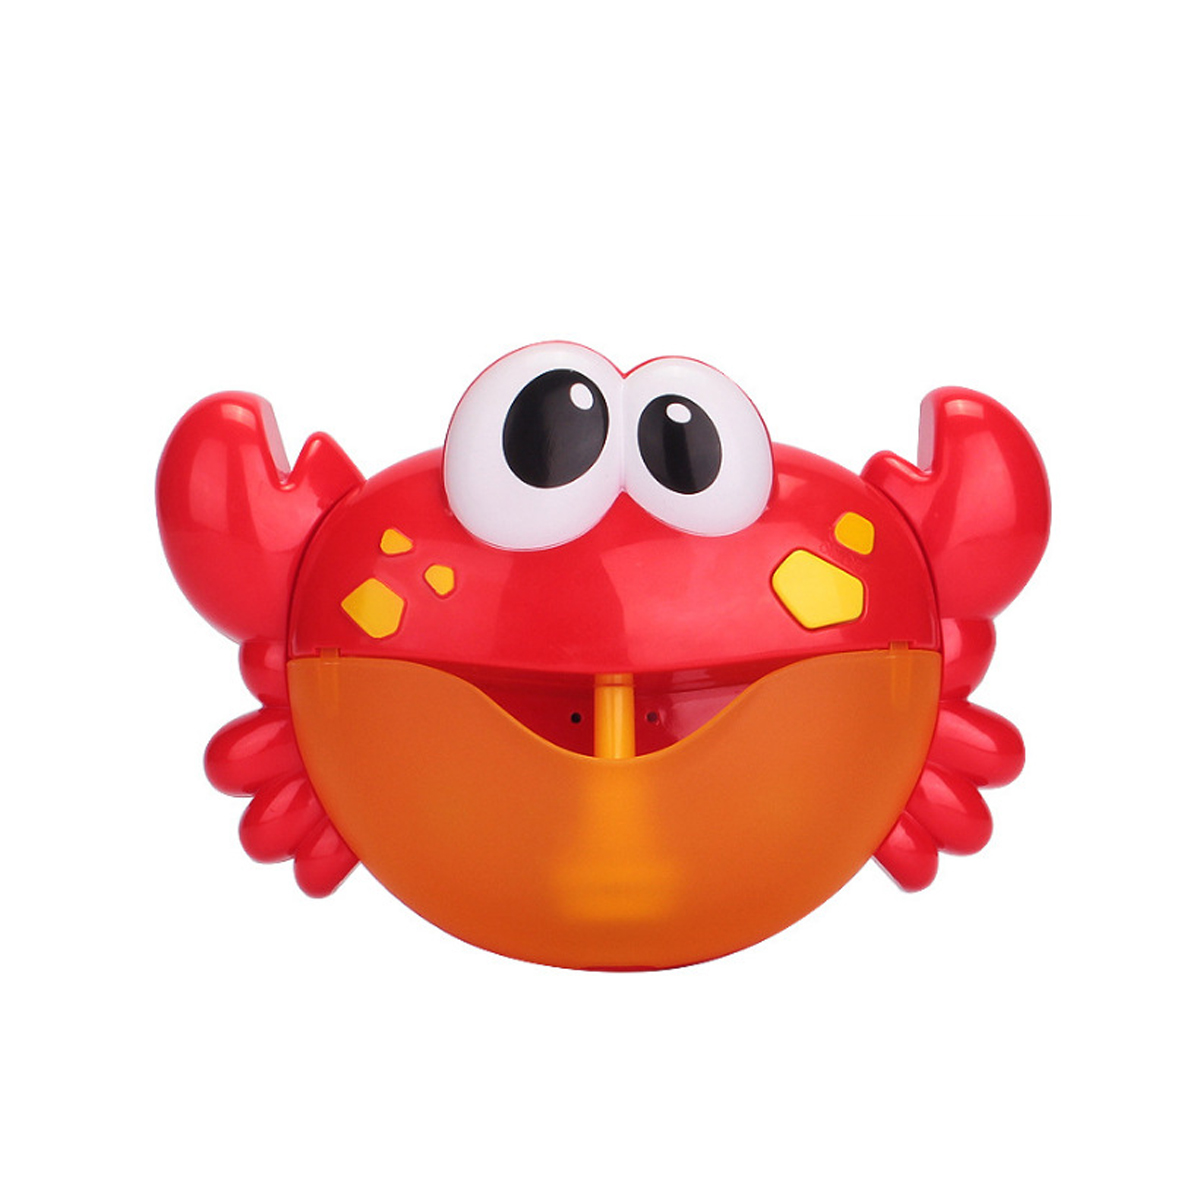 Crab Bubble Maker Machine Musical Bubble Automated Bath Baby Shower Fun Time Toy 